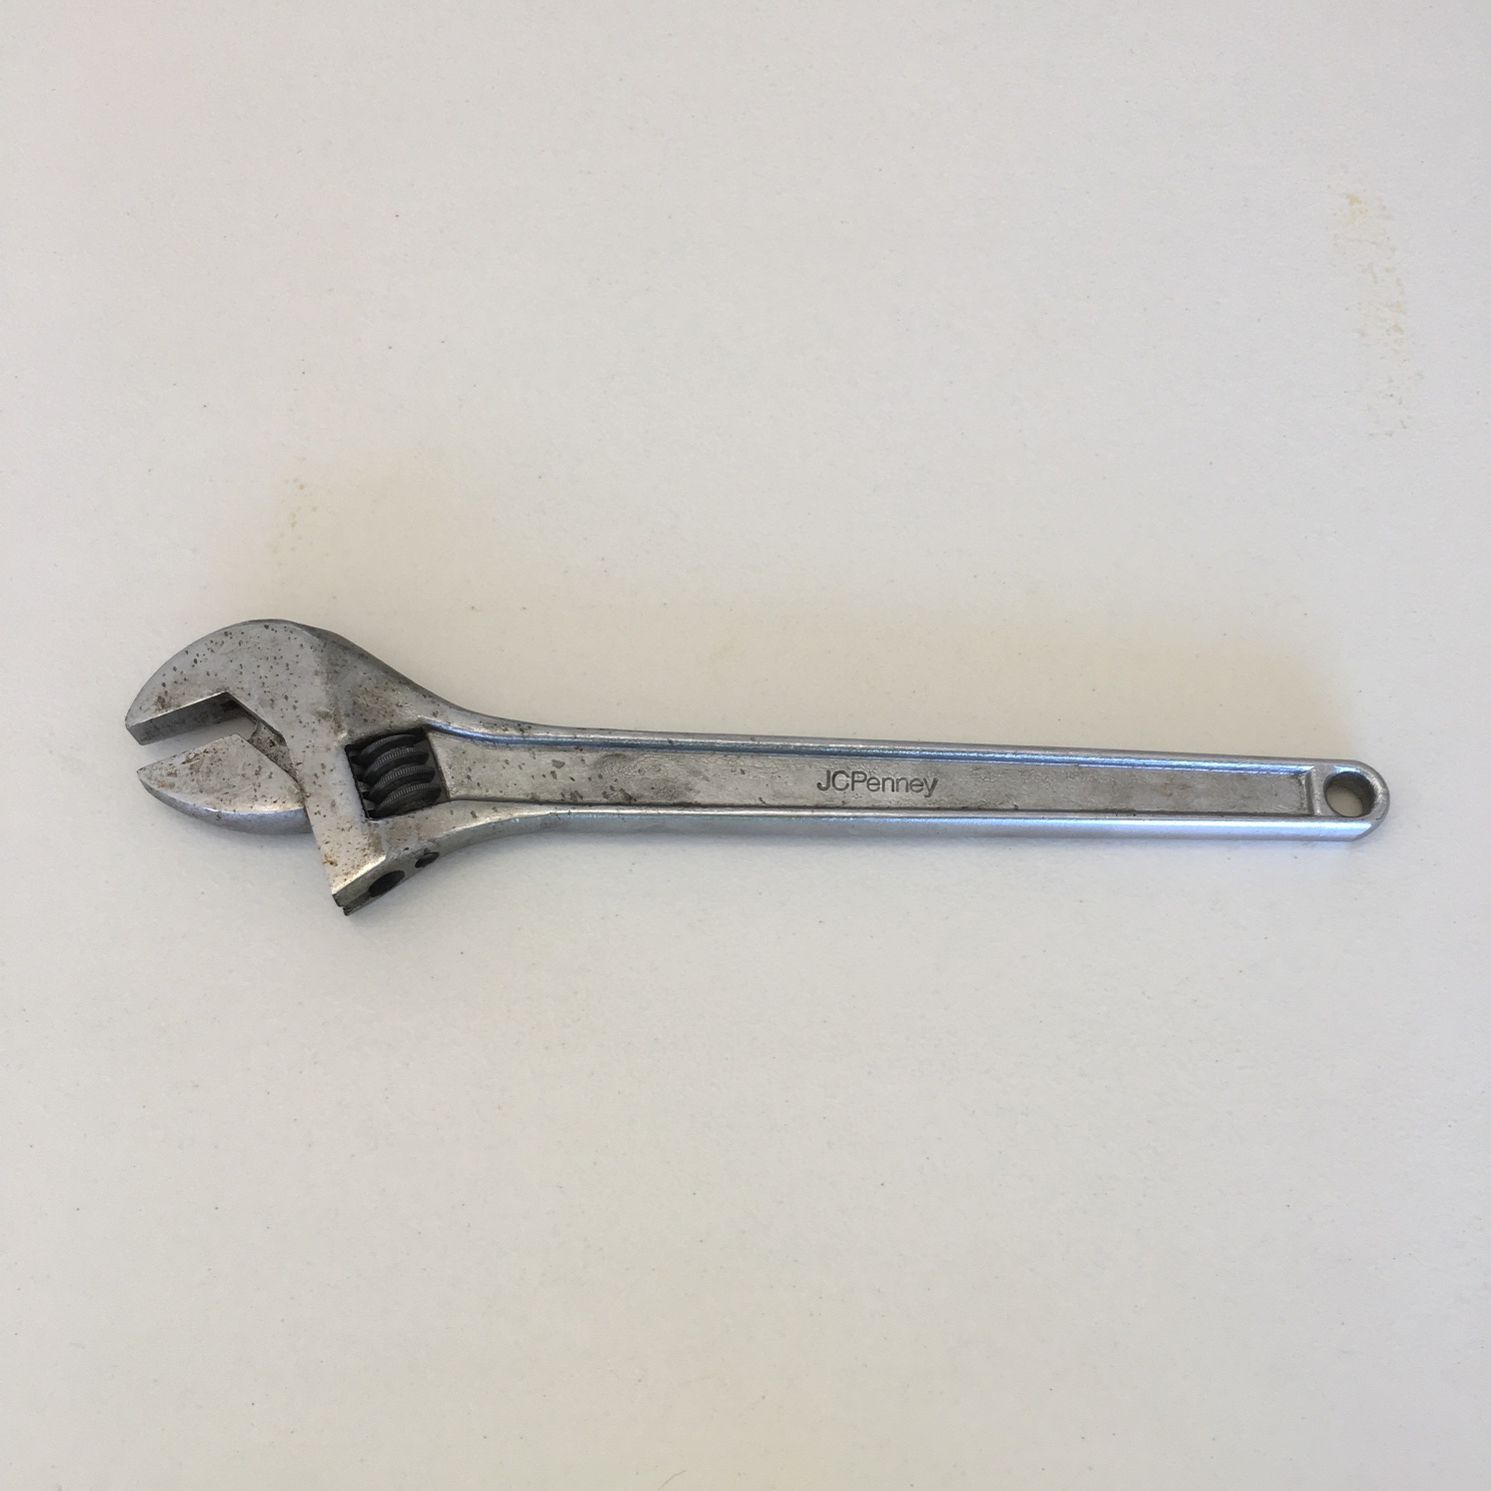 Rare JC Penney 15” Wrench